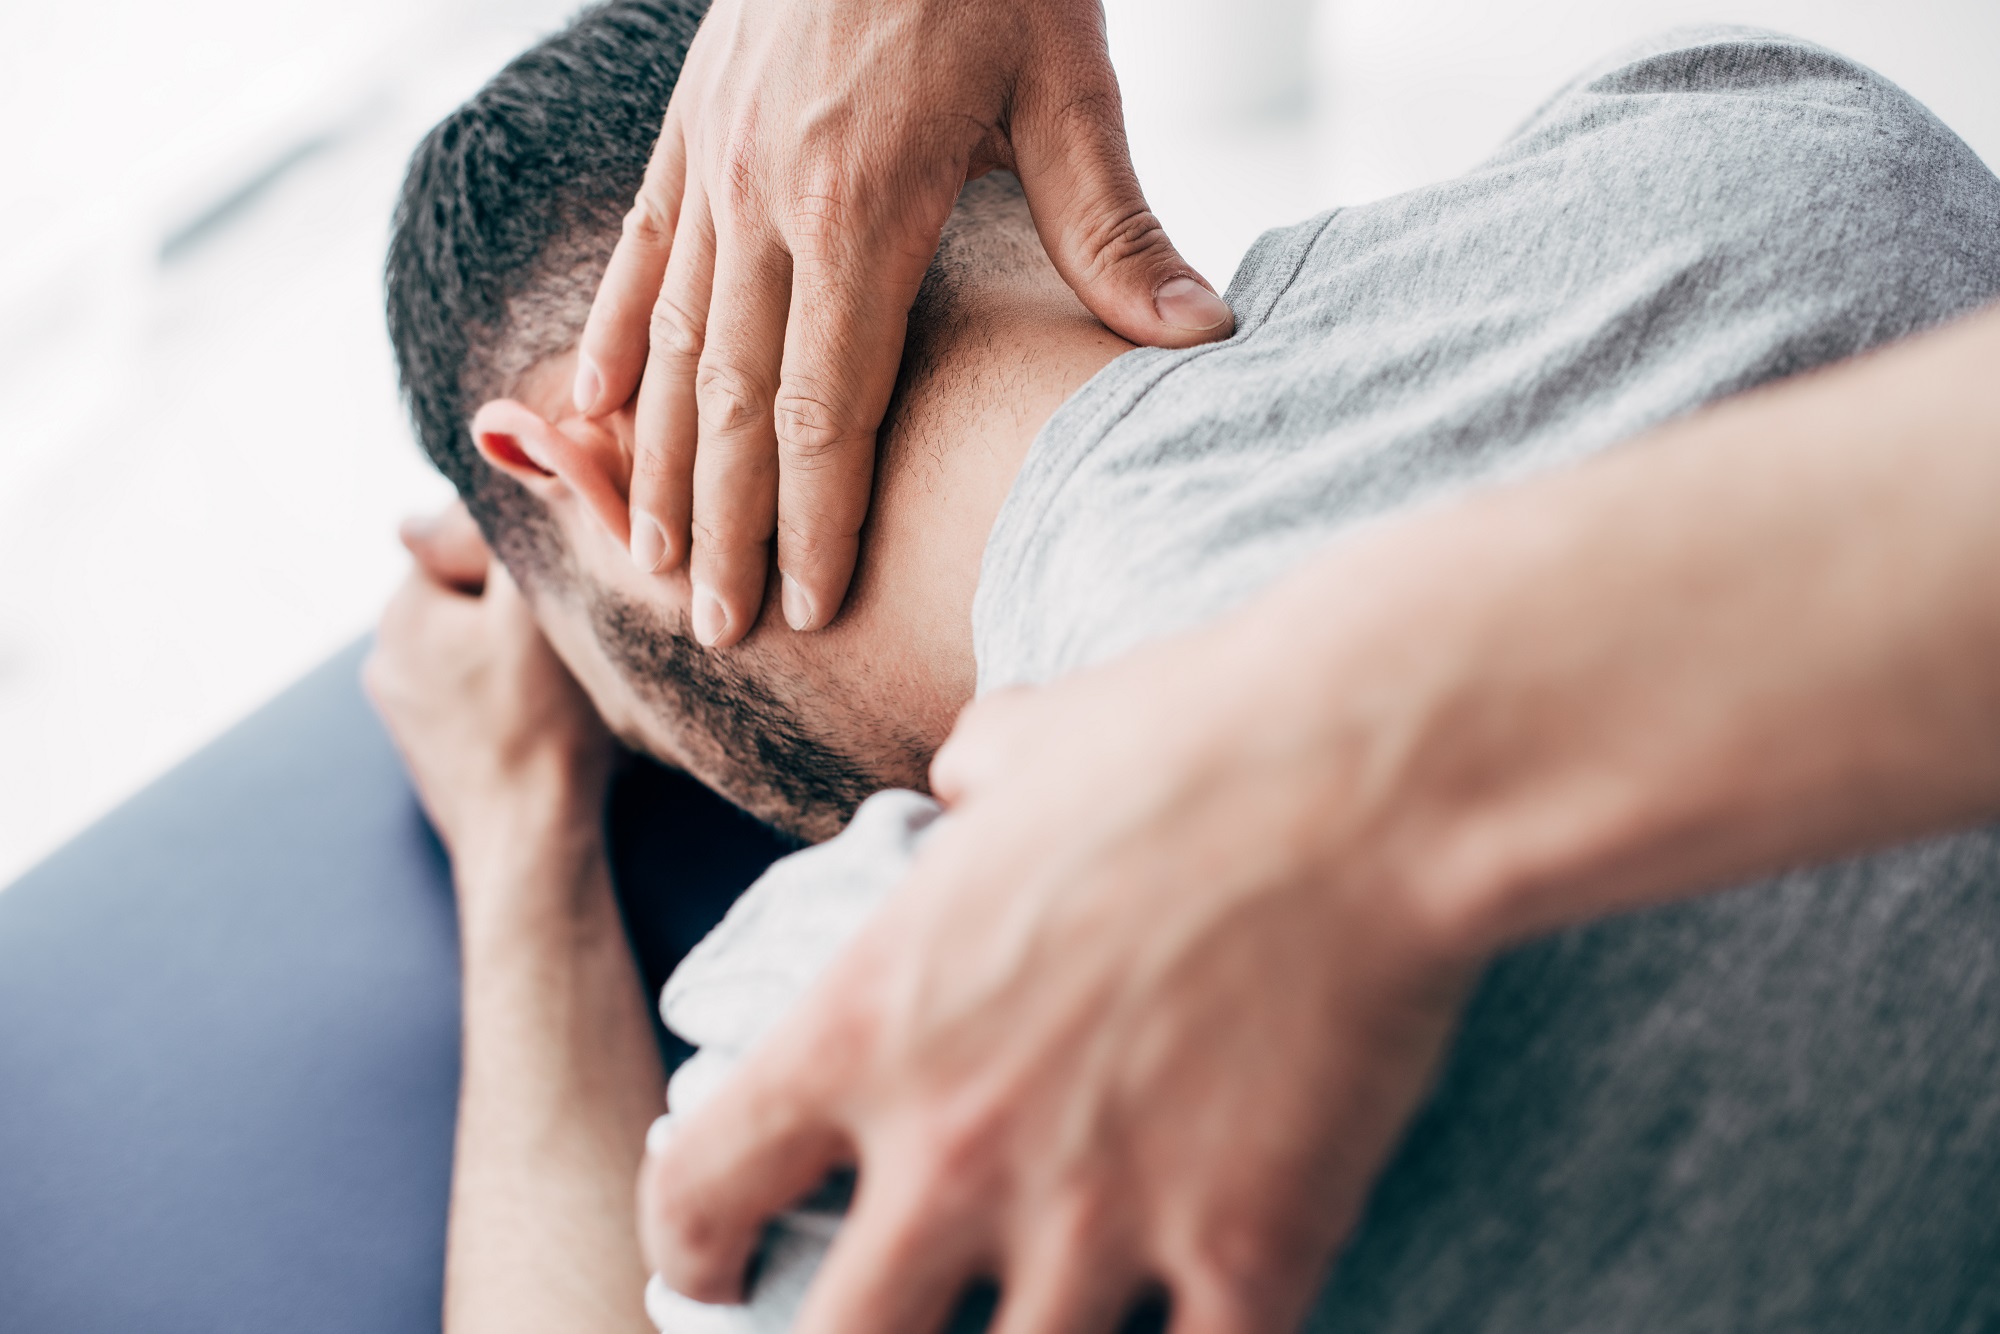 The Best Chiropractor in Mission Viejo Can Correct Shoulder, Arm & Hand Problems